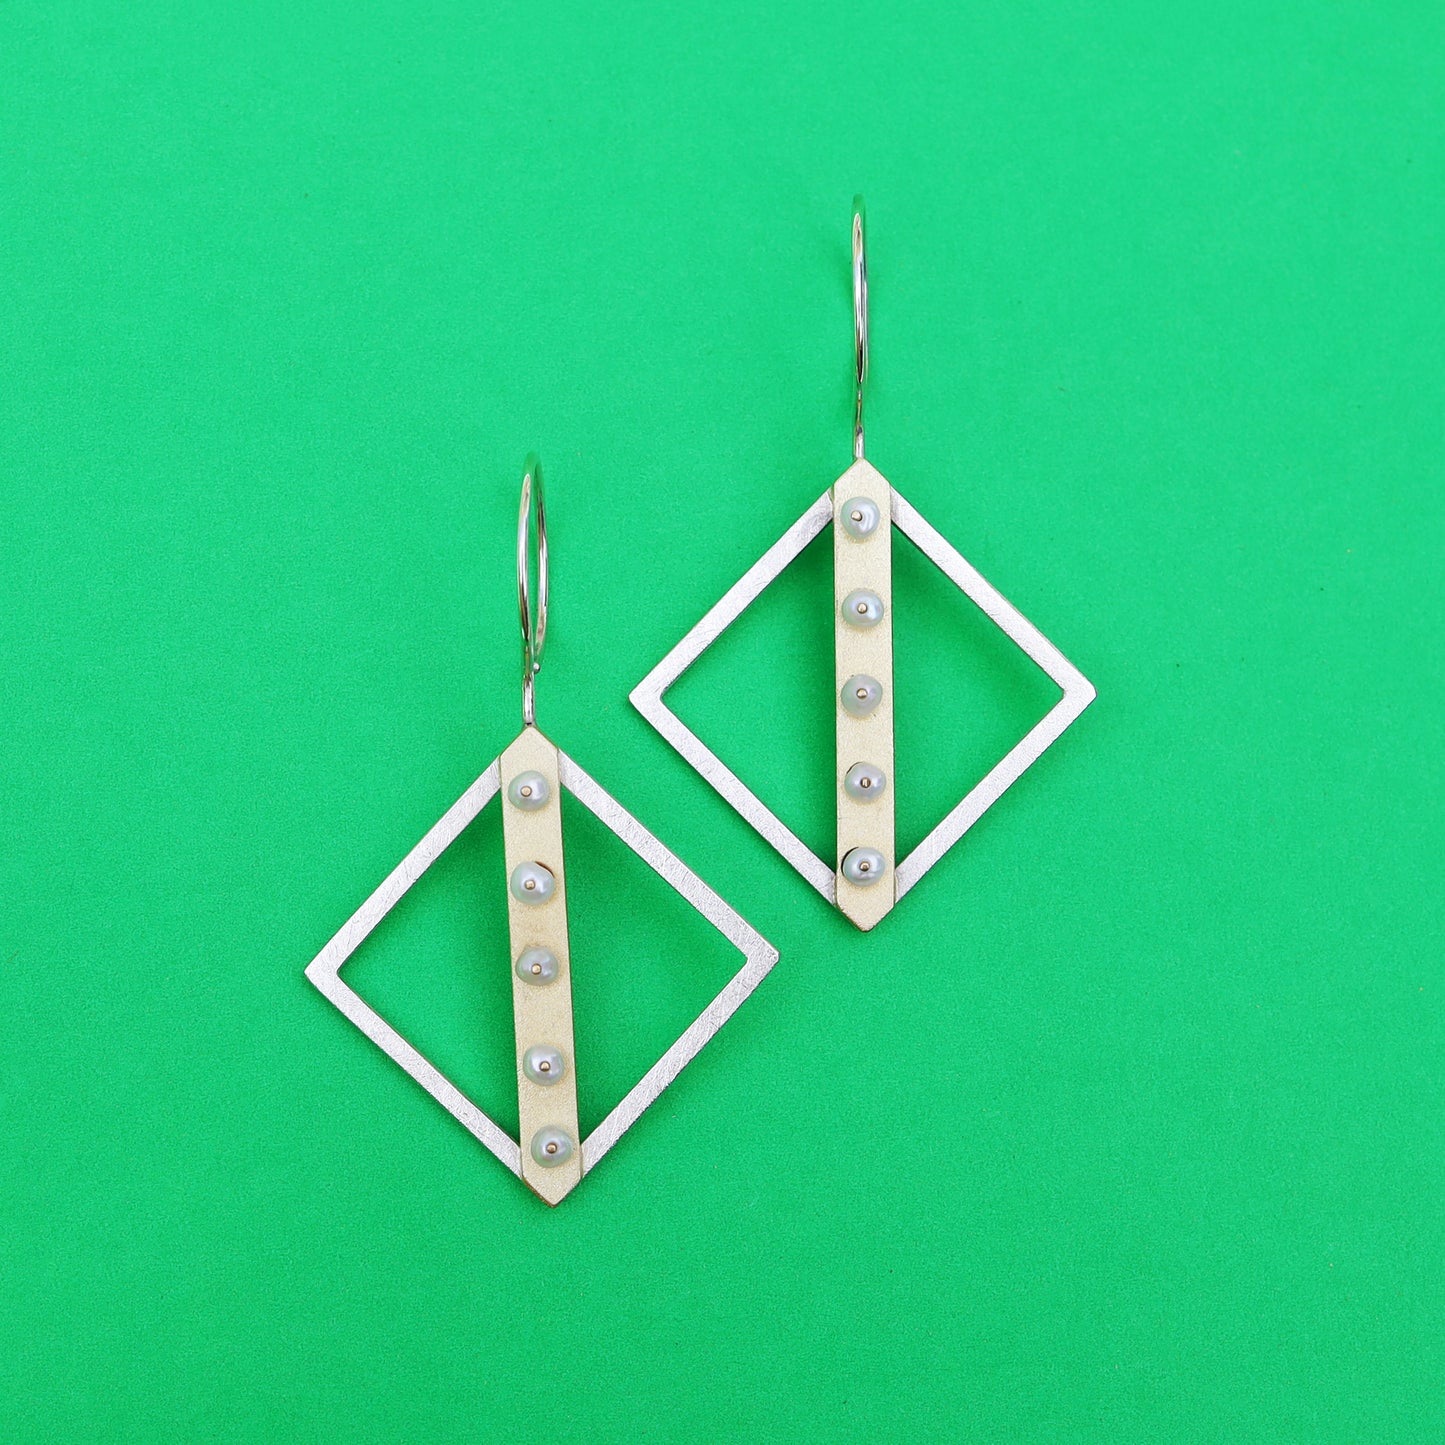 Sterling silver diamond-shaped earrings with gold line and pearl accents.